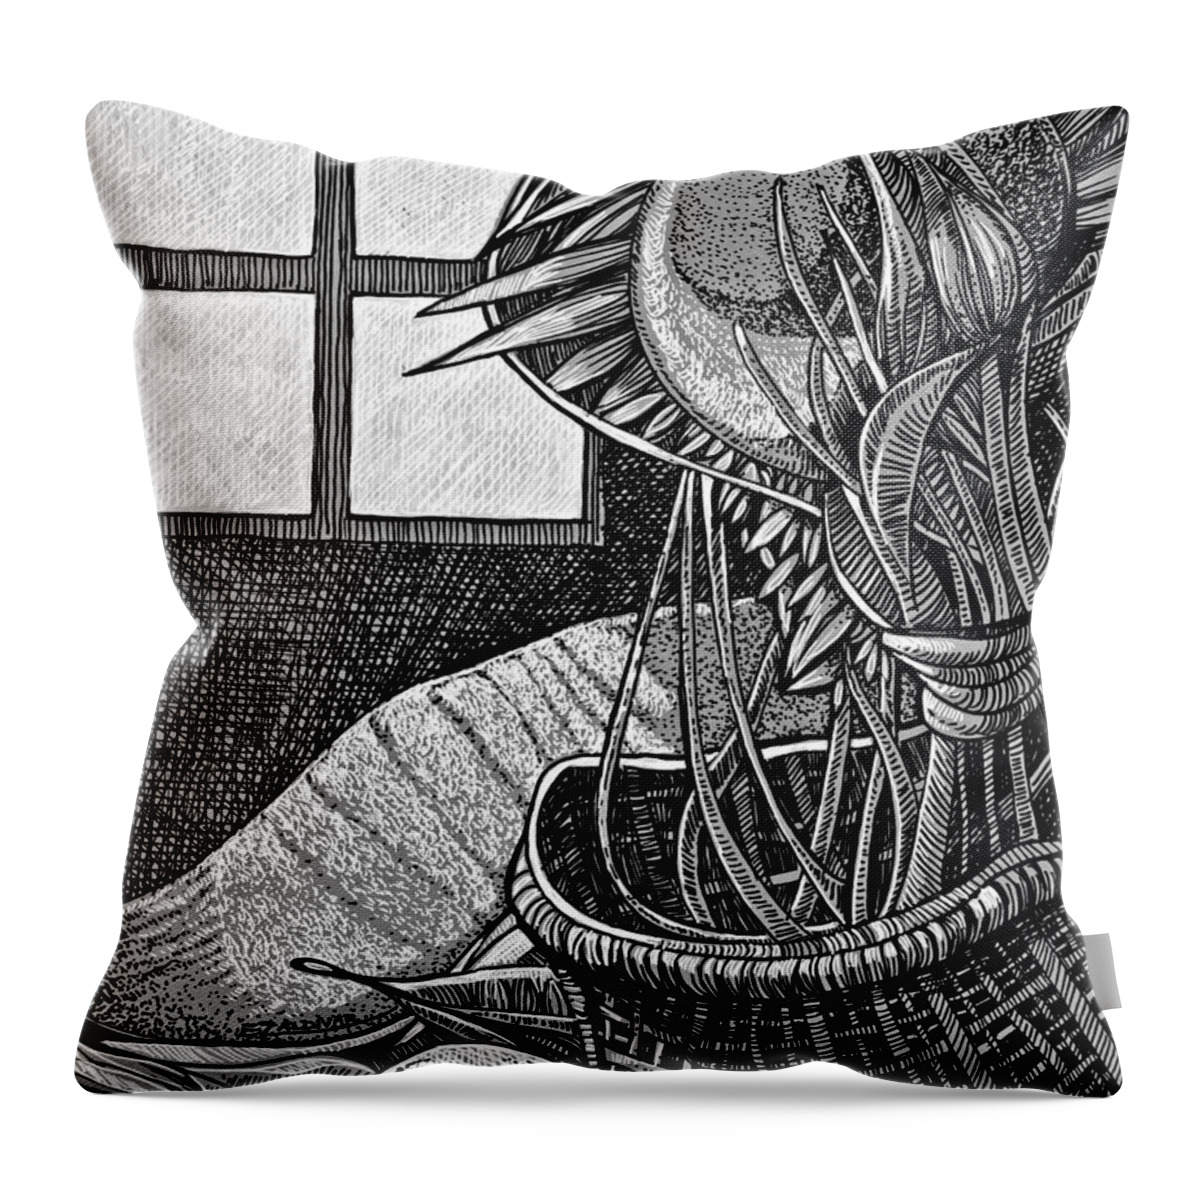 Pen And Ink Sketches Throw Pillow featuring the drawing The splendor of a brief moment in the window by Enrique Zaldivar